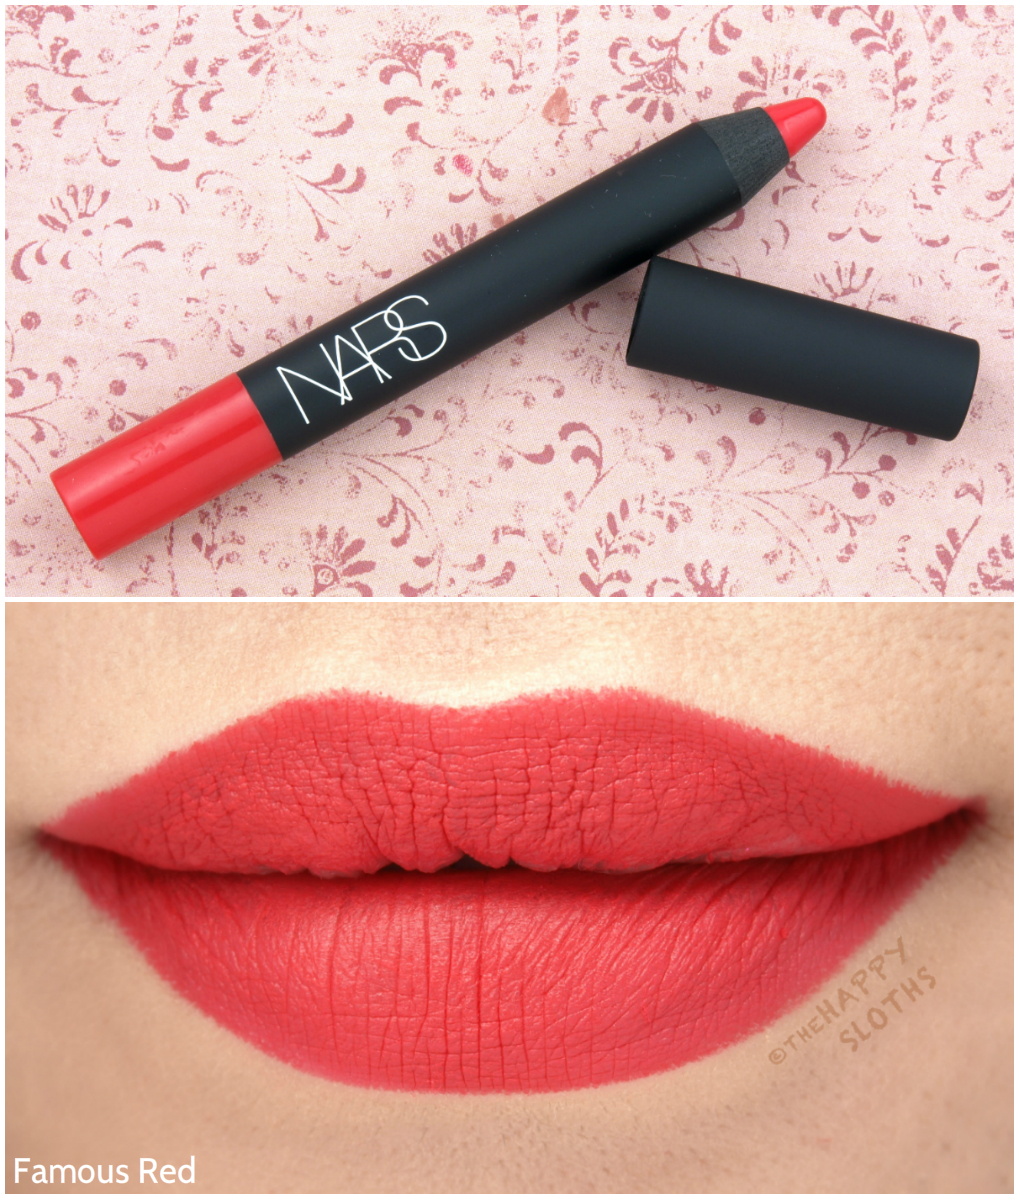 NARS Velvet Matte Lip Pencil in "Famous Red": Review and Swatches